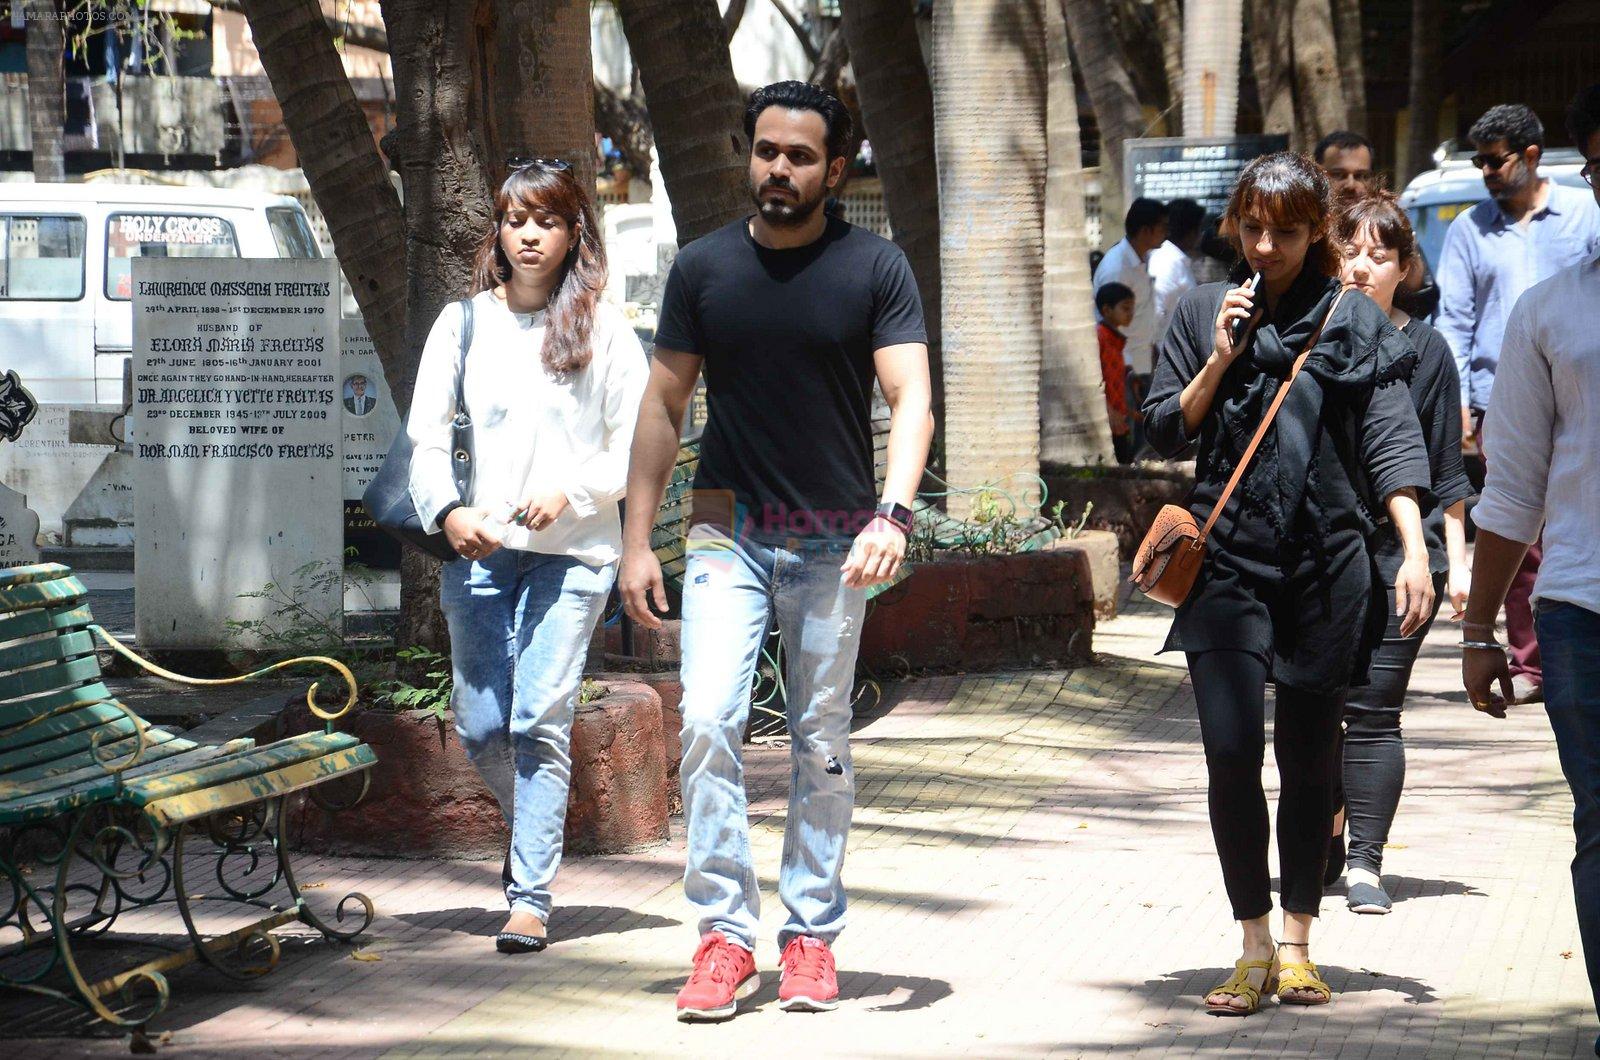 Emraan Hashmi's mothers funeral on 13th arch 2016